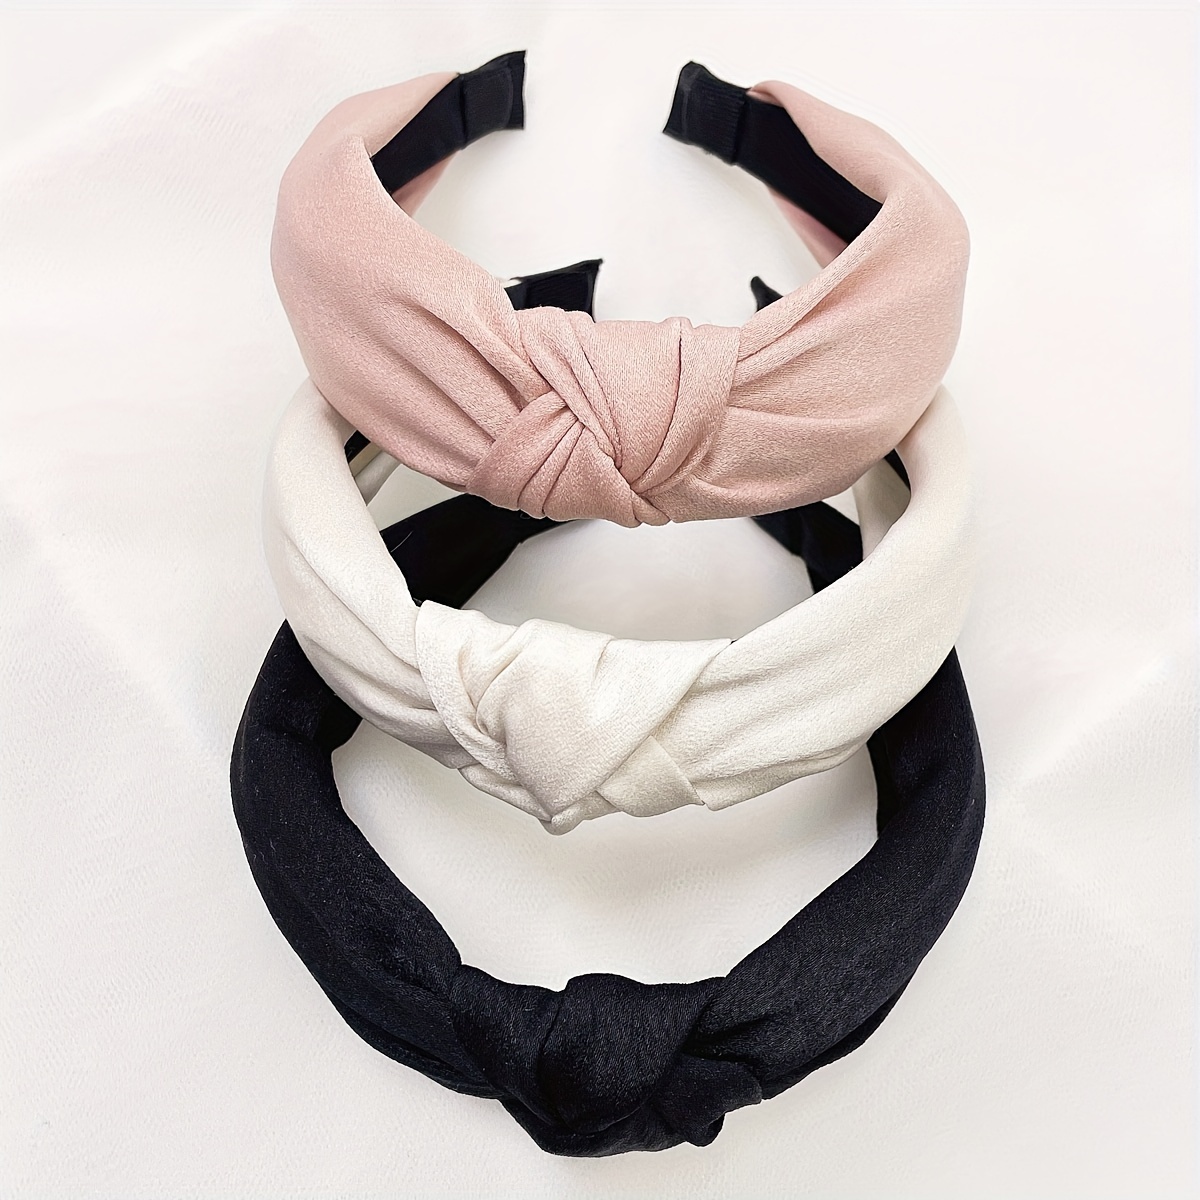 

A Set Of 3 Ladies' New Spring And Summer Single-color Black And Pink Fabric Hair Accessories, Sweet And Elegant, For Daily Use, Street Washing, And Headbands